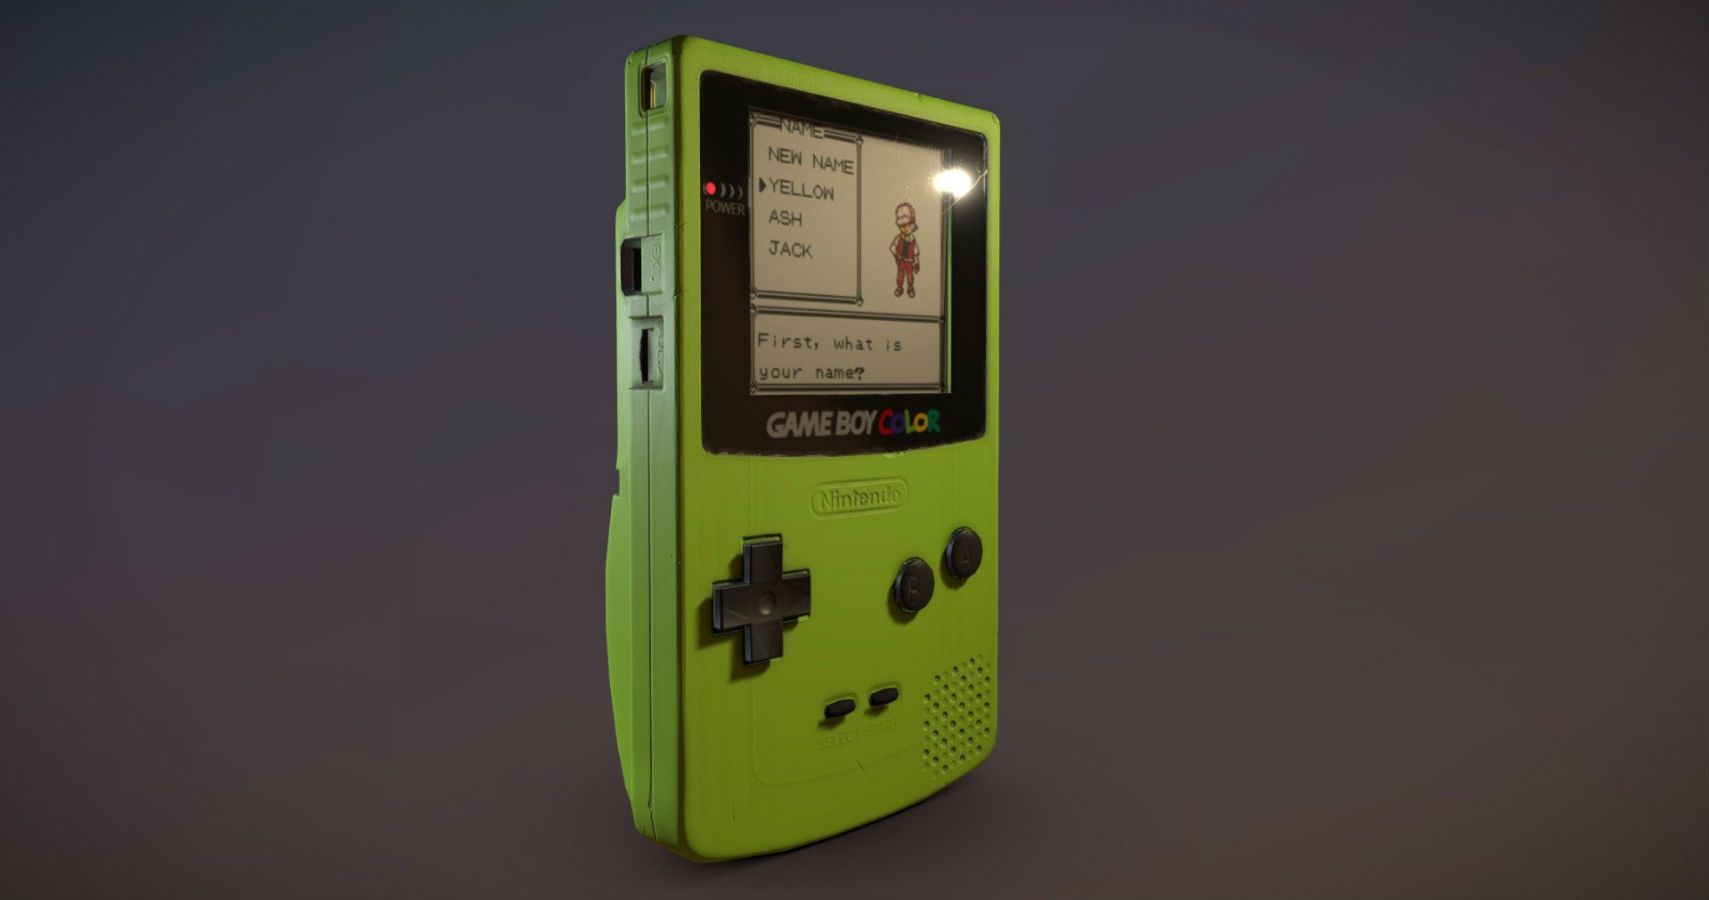 brand new gameboy color